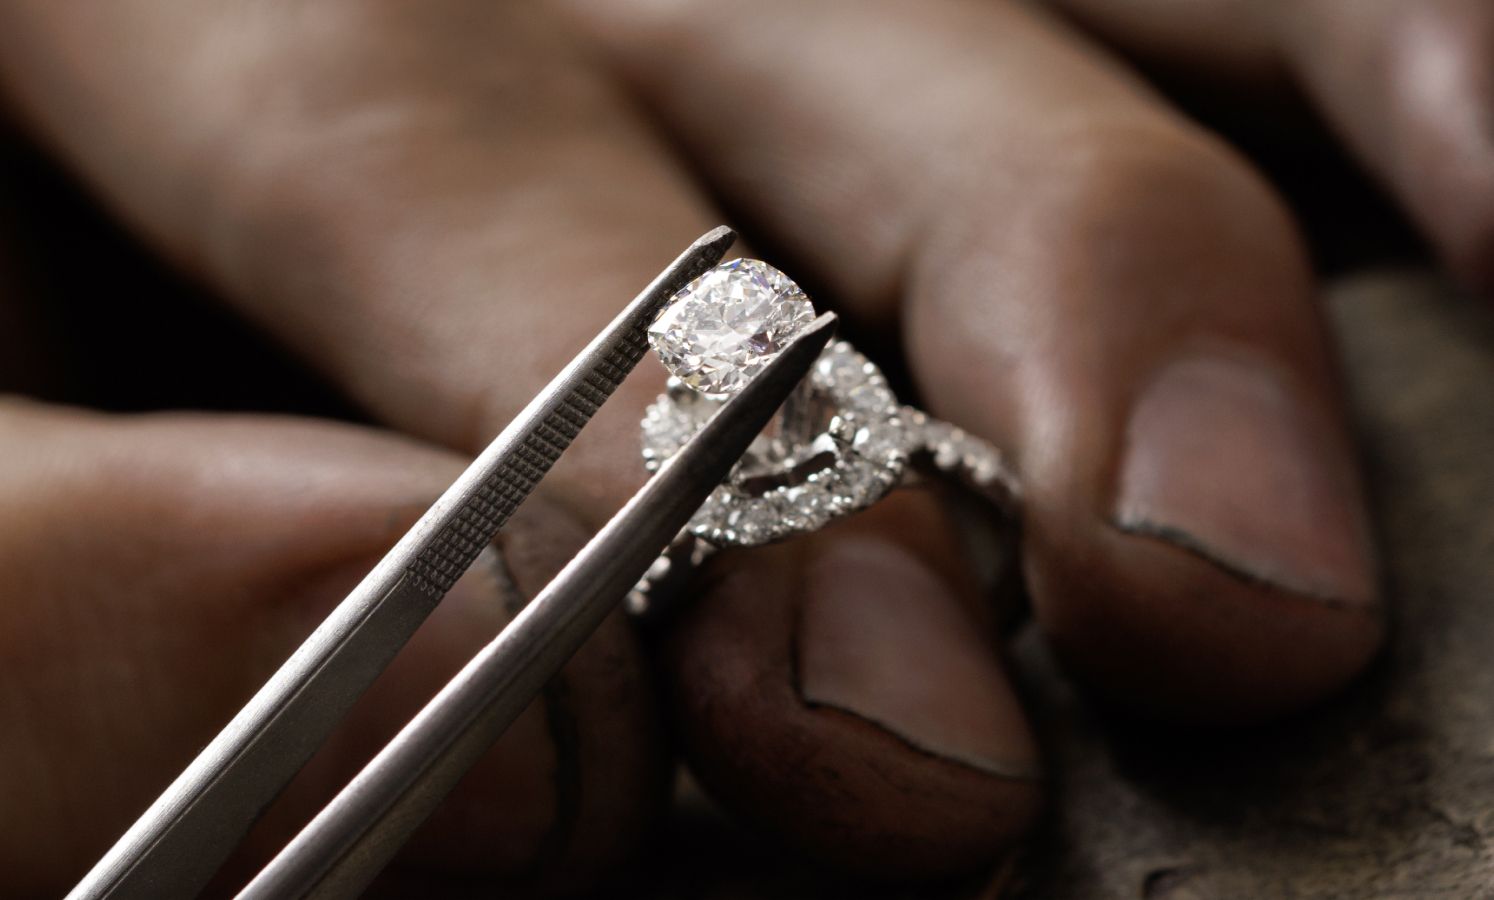 A jeweler setting diamond into an engagement ring